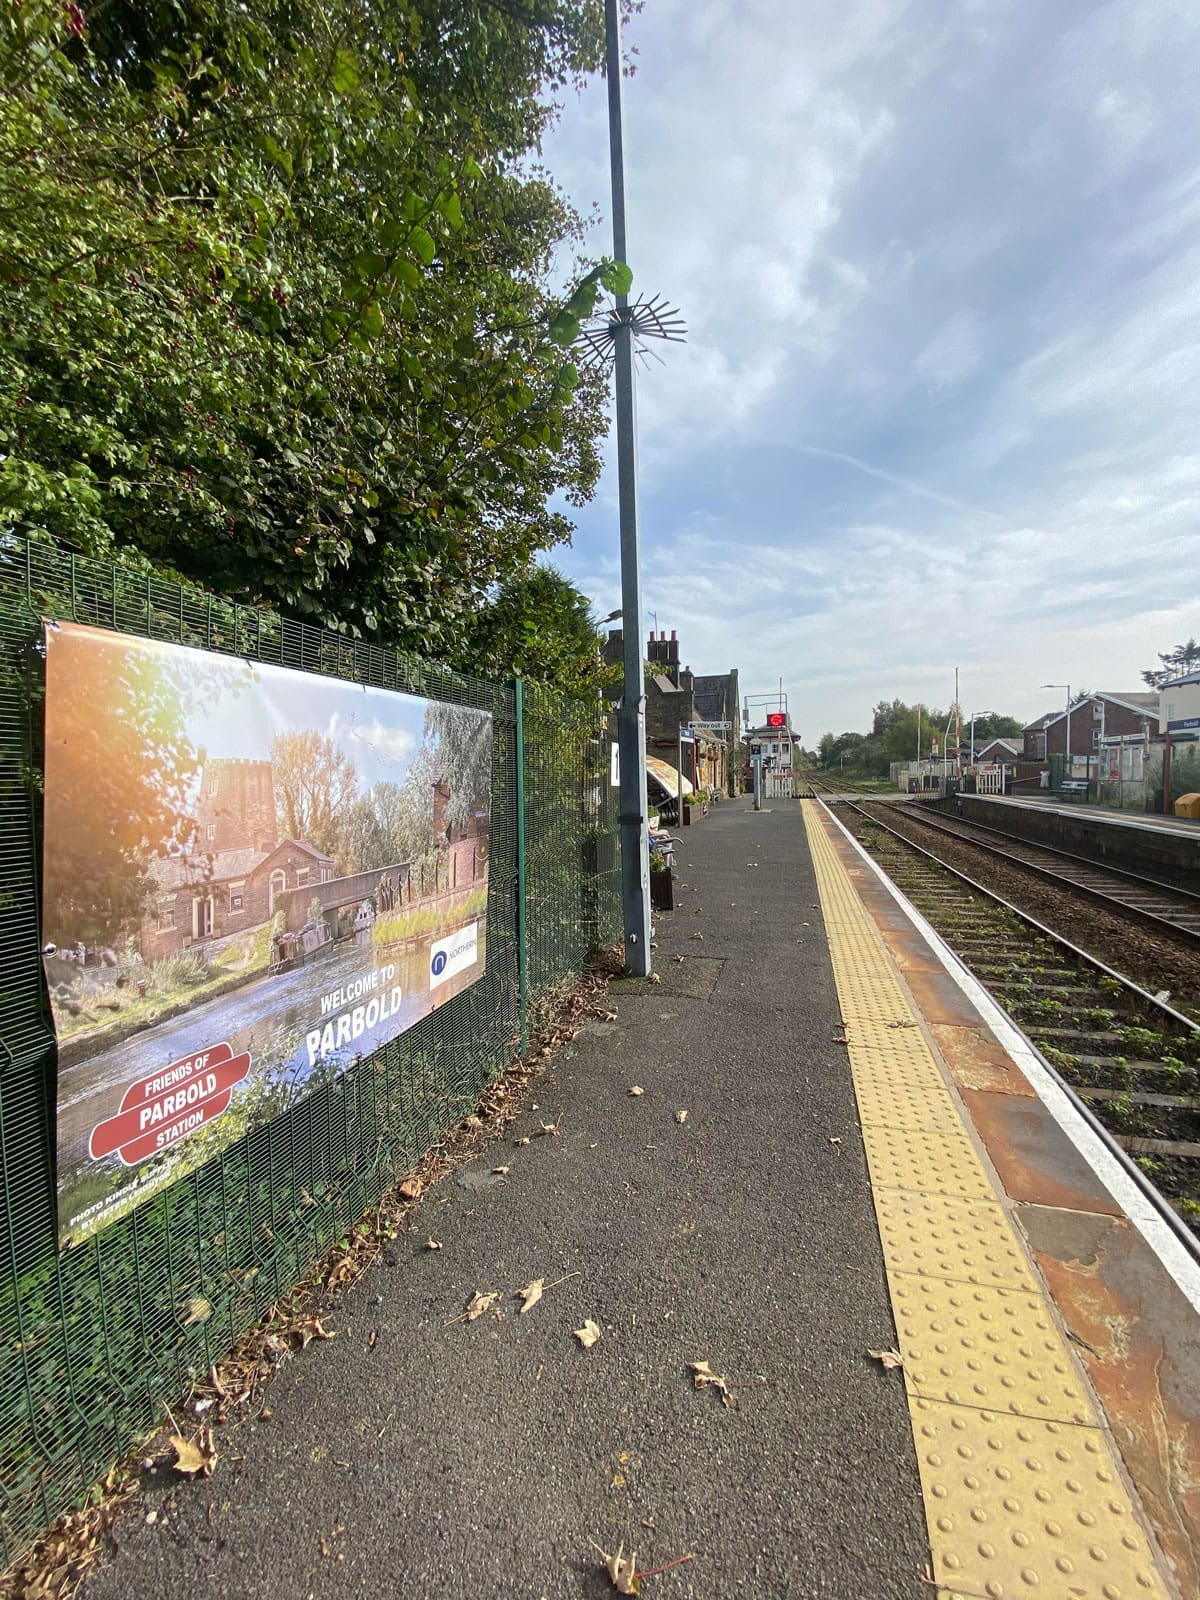 Travel through time with new artwork at a Lancashire station